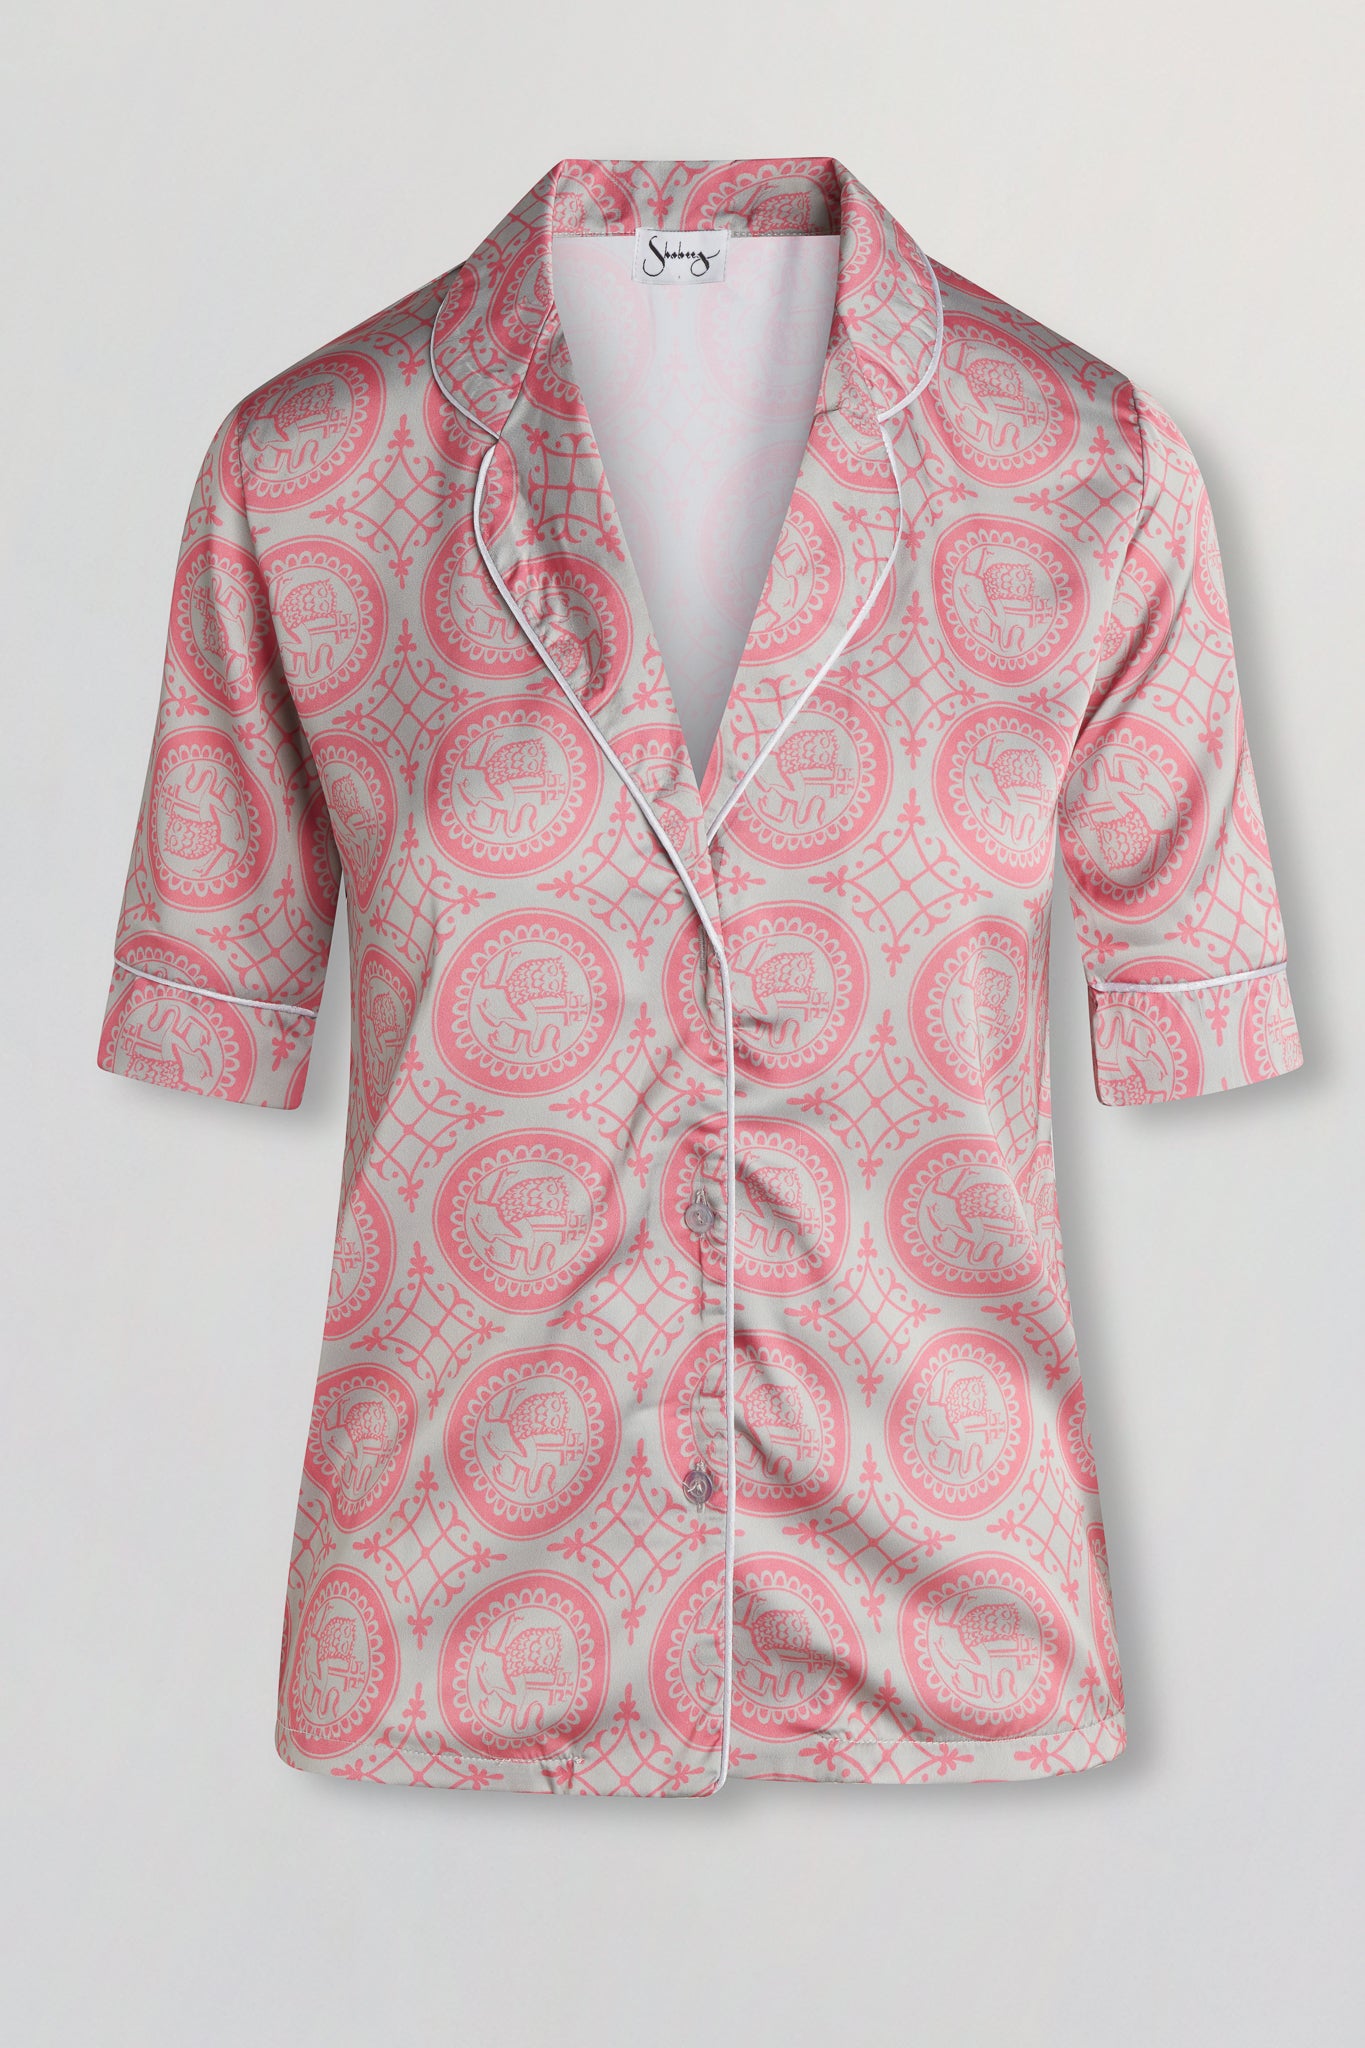 Satin short sleeve button down blouse in pink heritage print